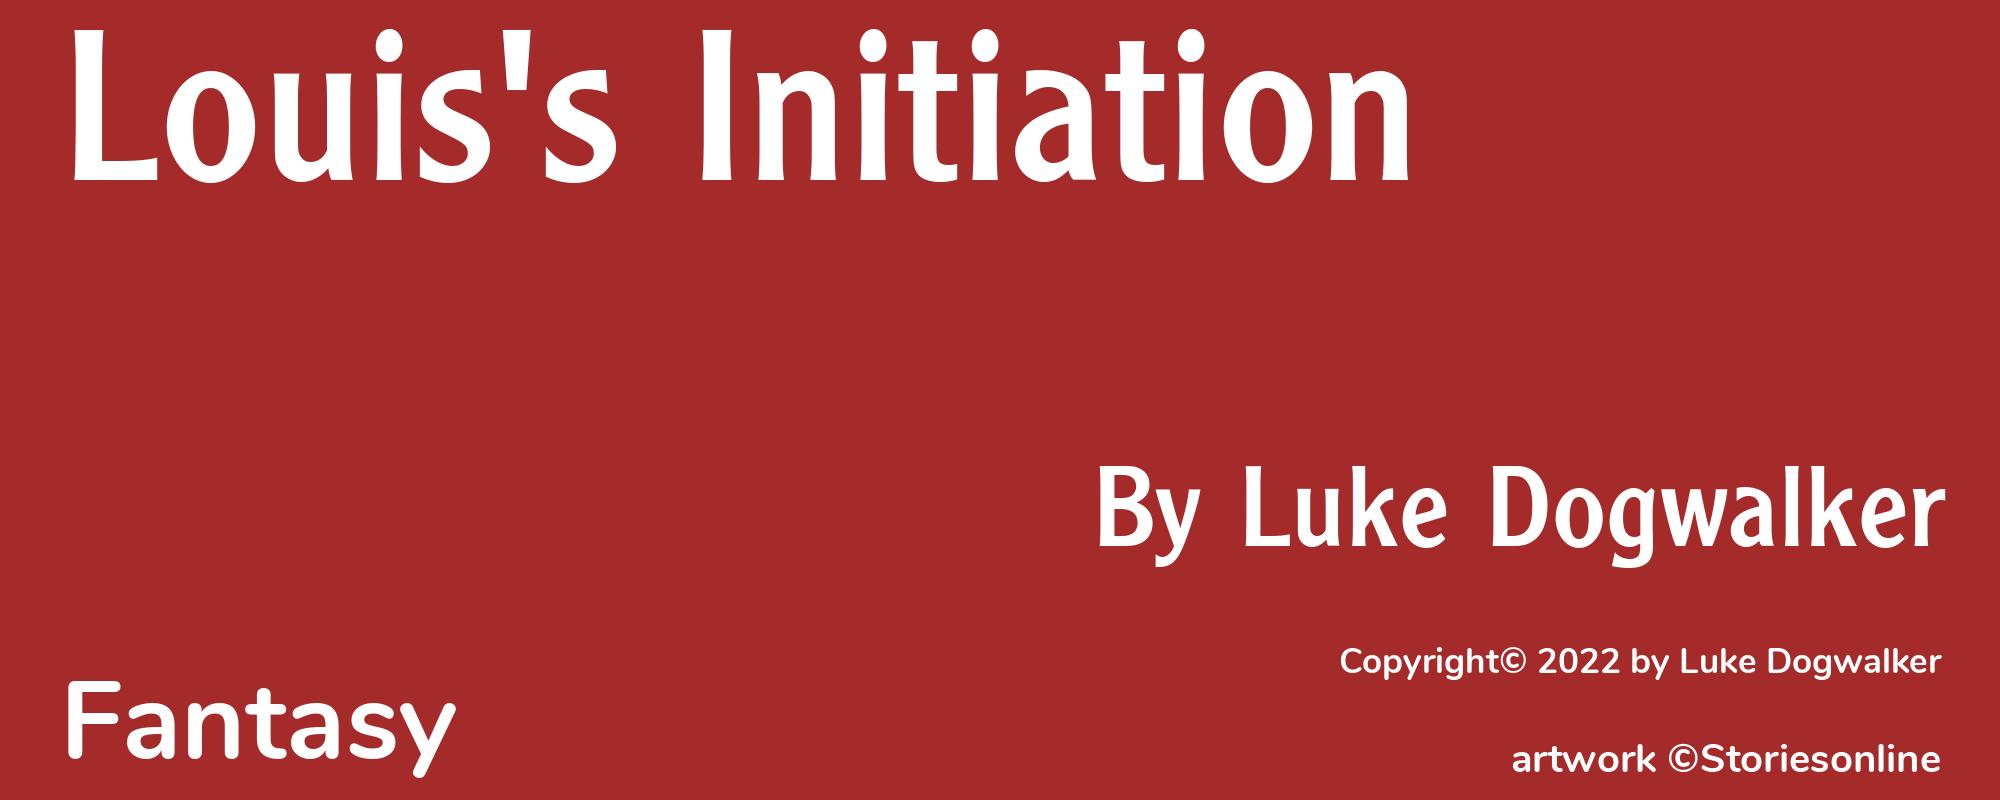 Louis's Initiation - Cover